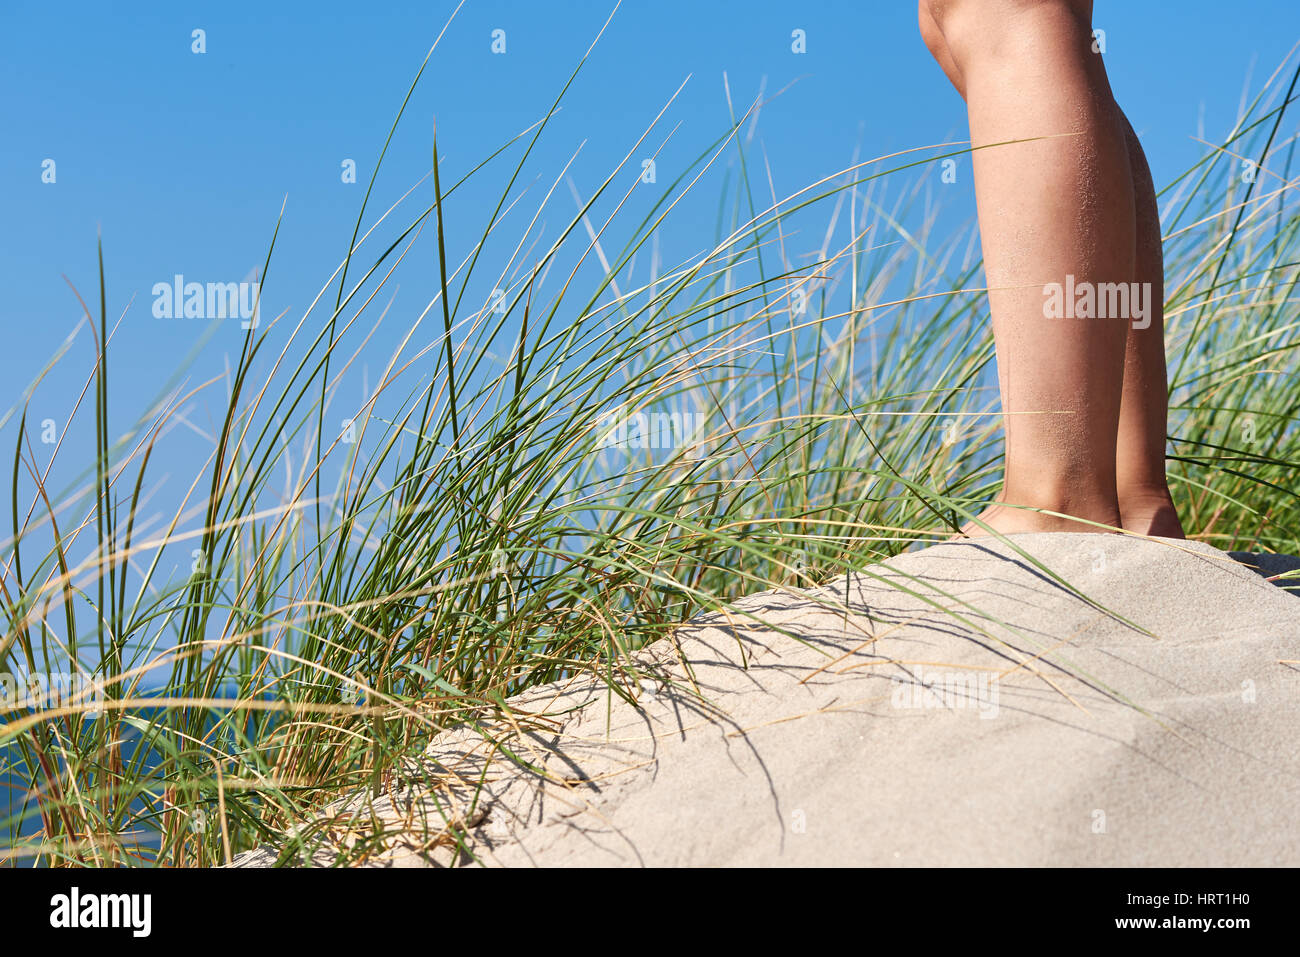 Legs of a young woman standing in the sand dunes Stock Photo